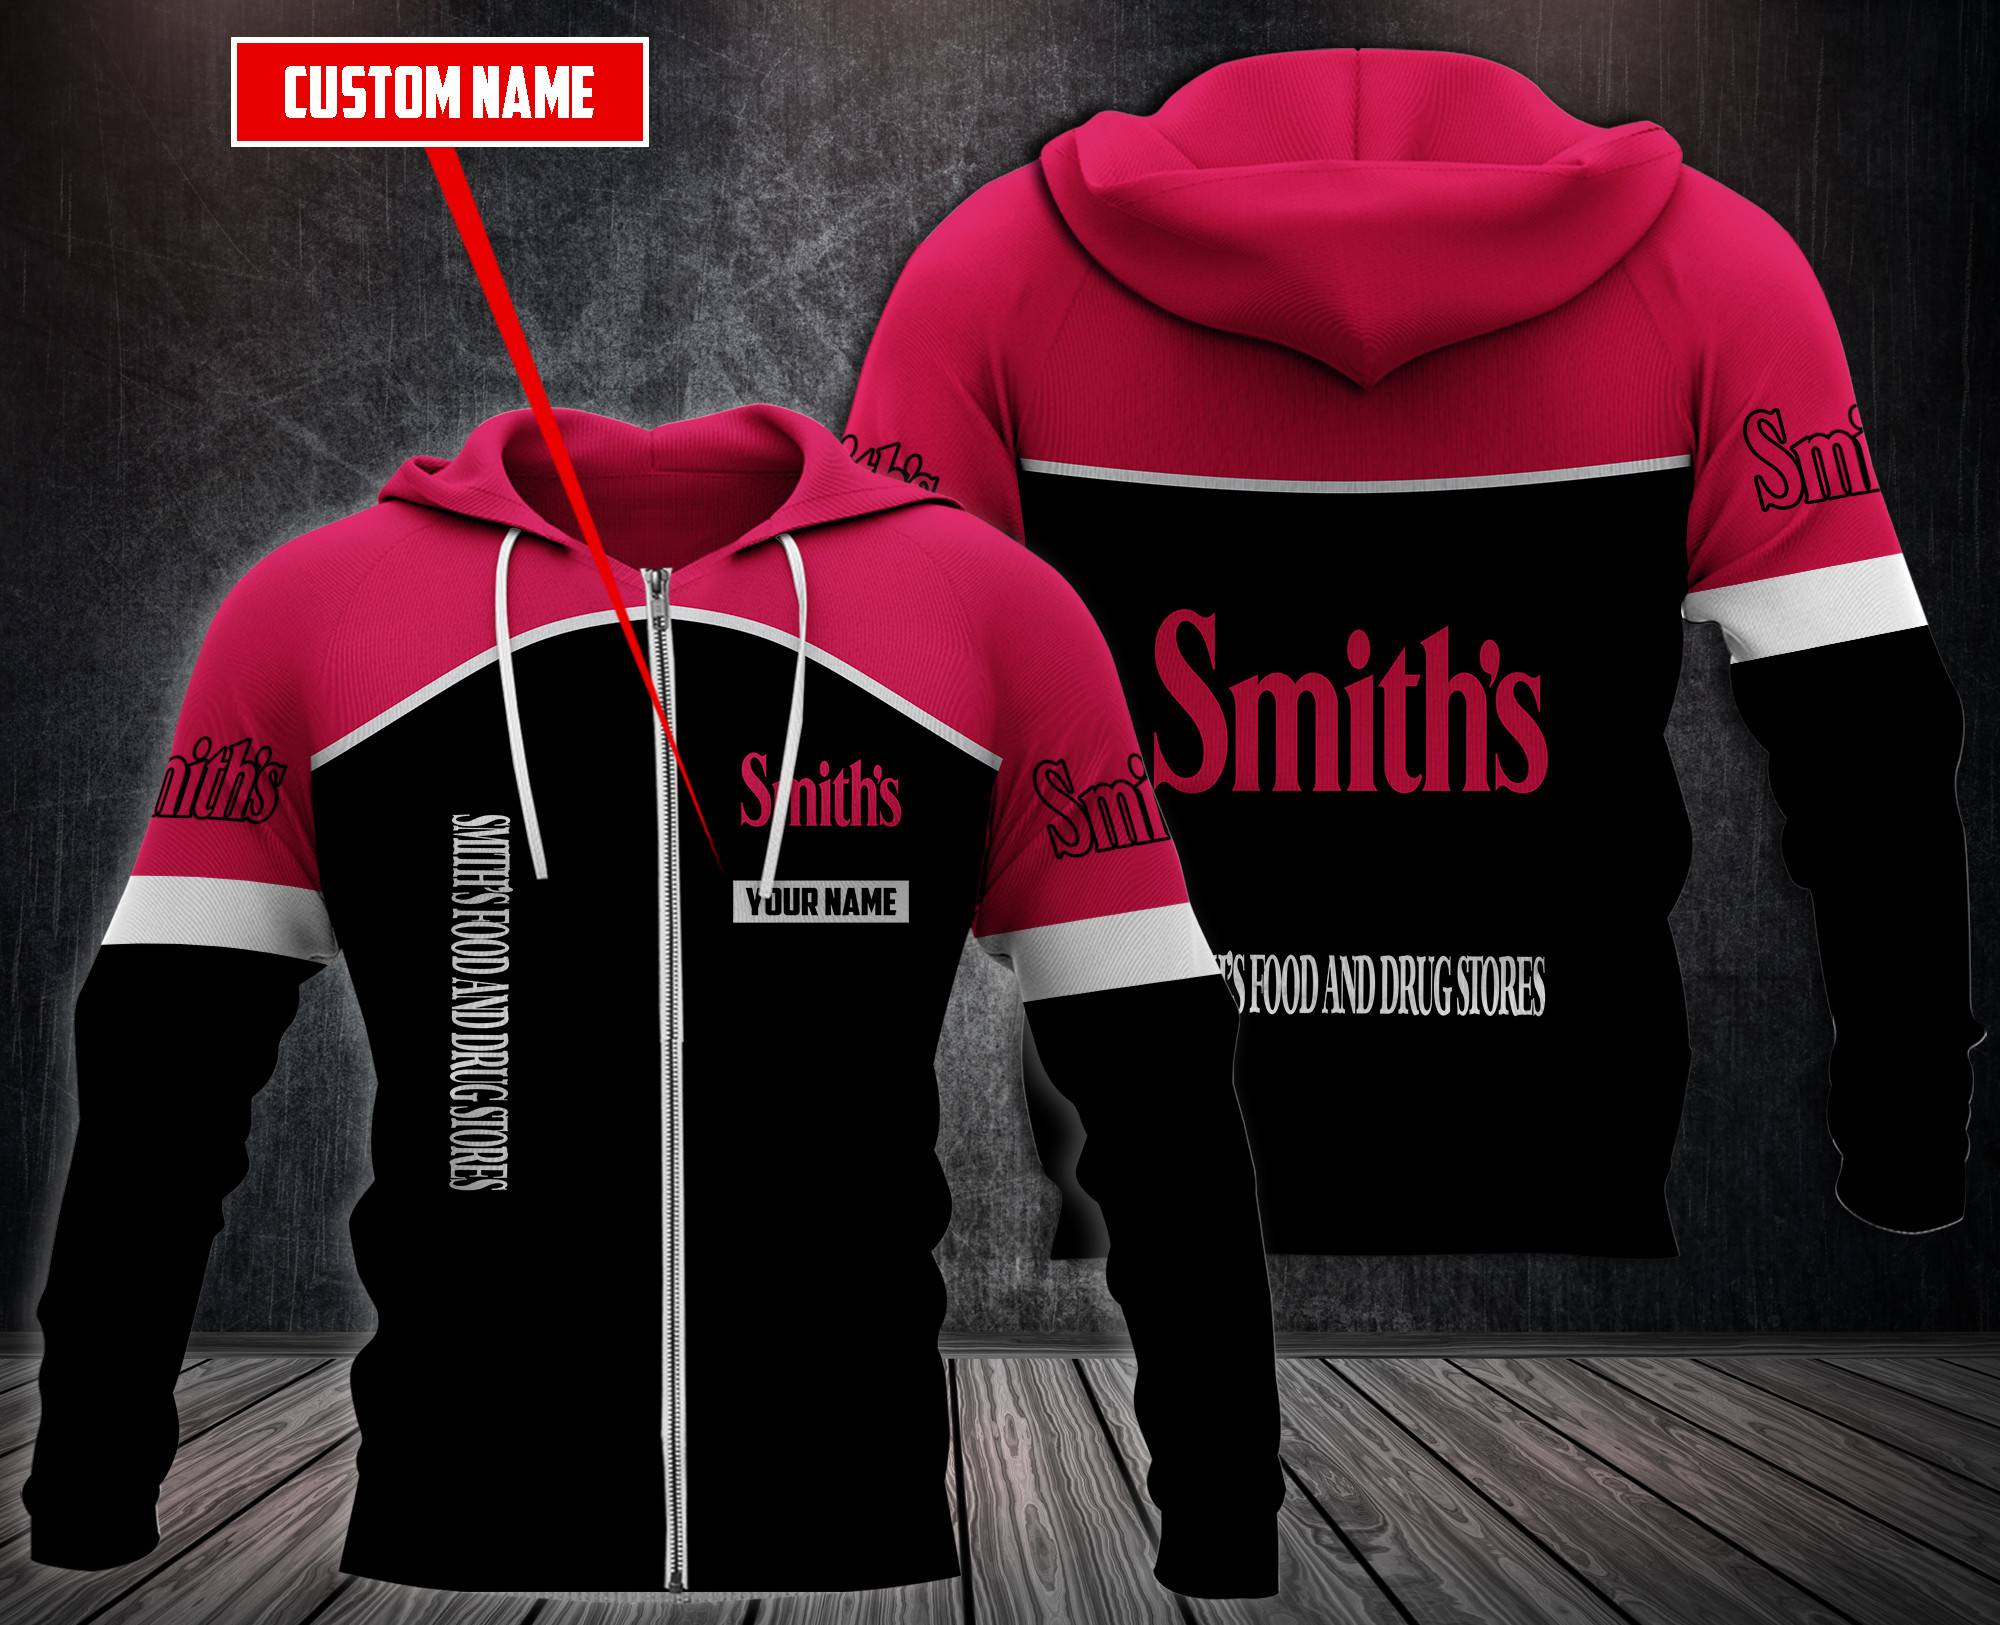 Choose the right hoodies for you on our boxboxshirt and ethershirt websites in 2022 42